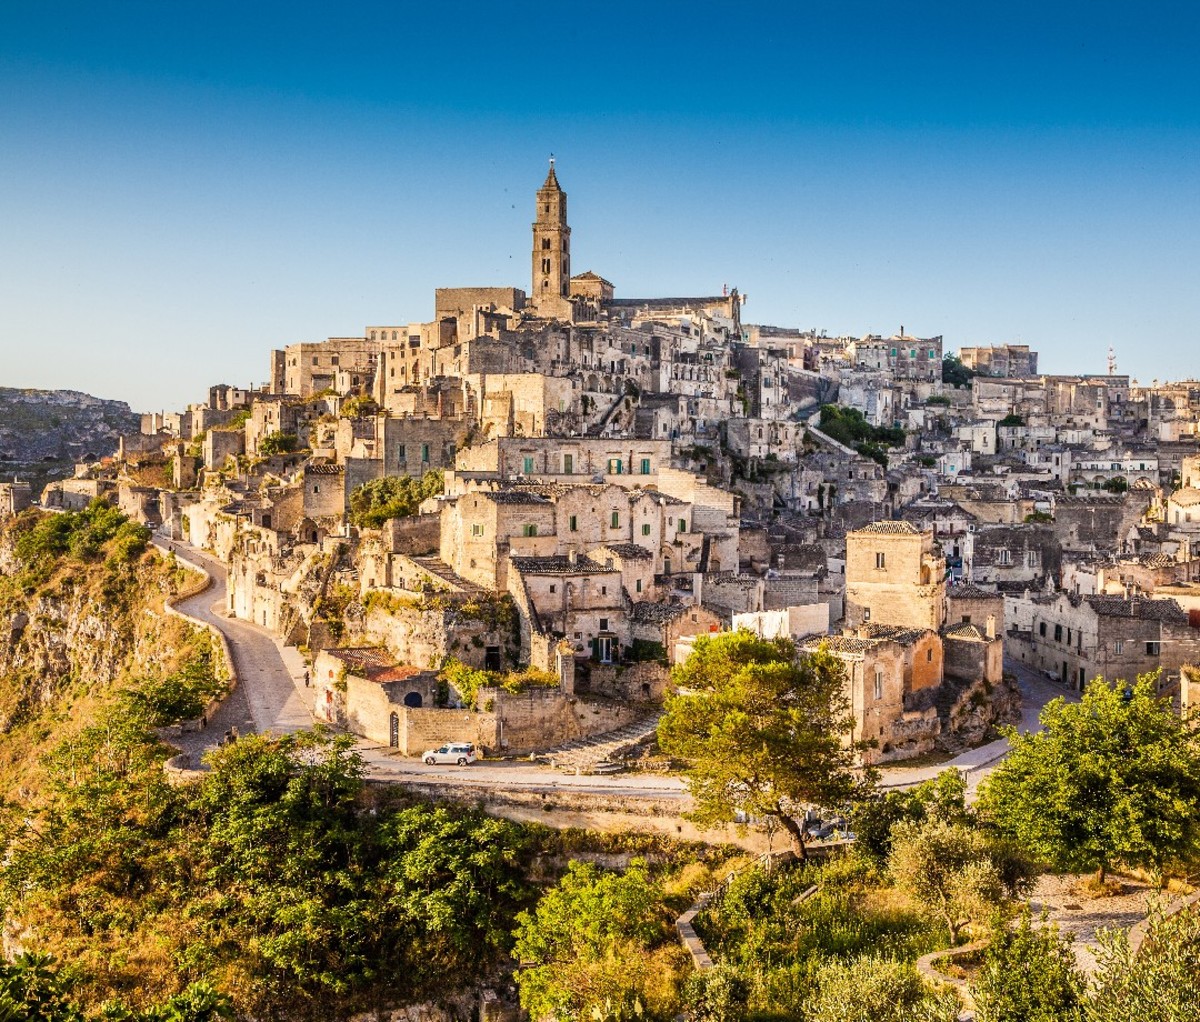 Sunrise over the town of Matera, Italy.